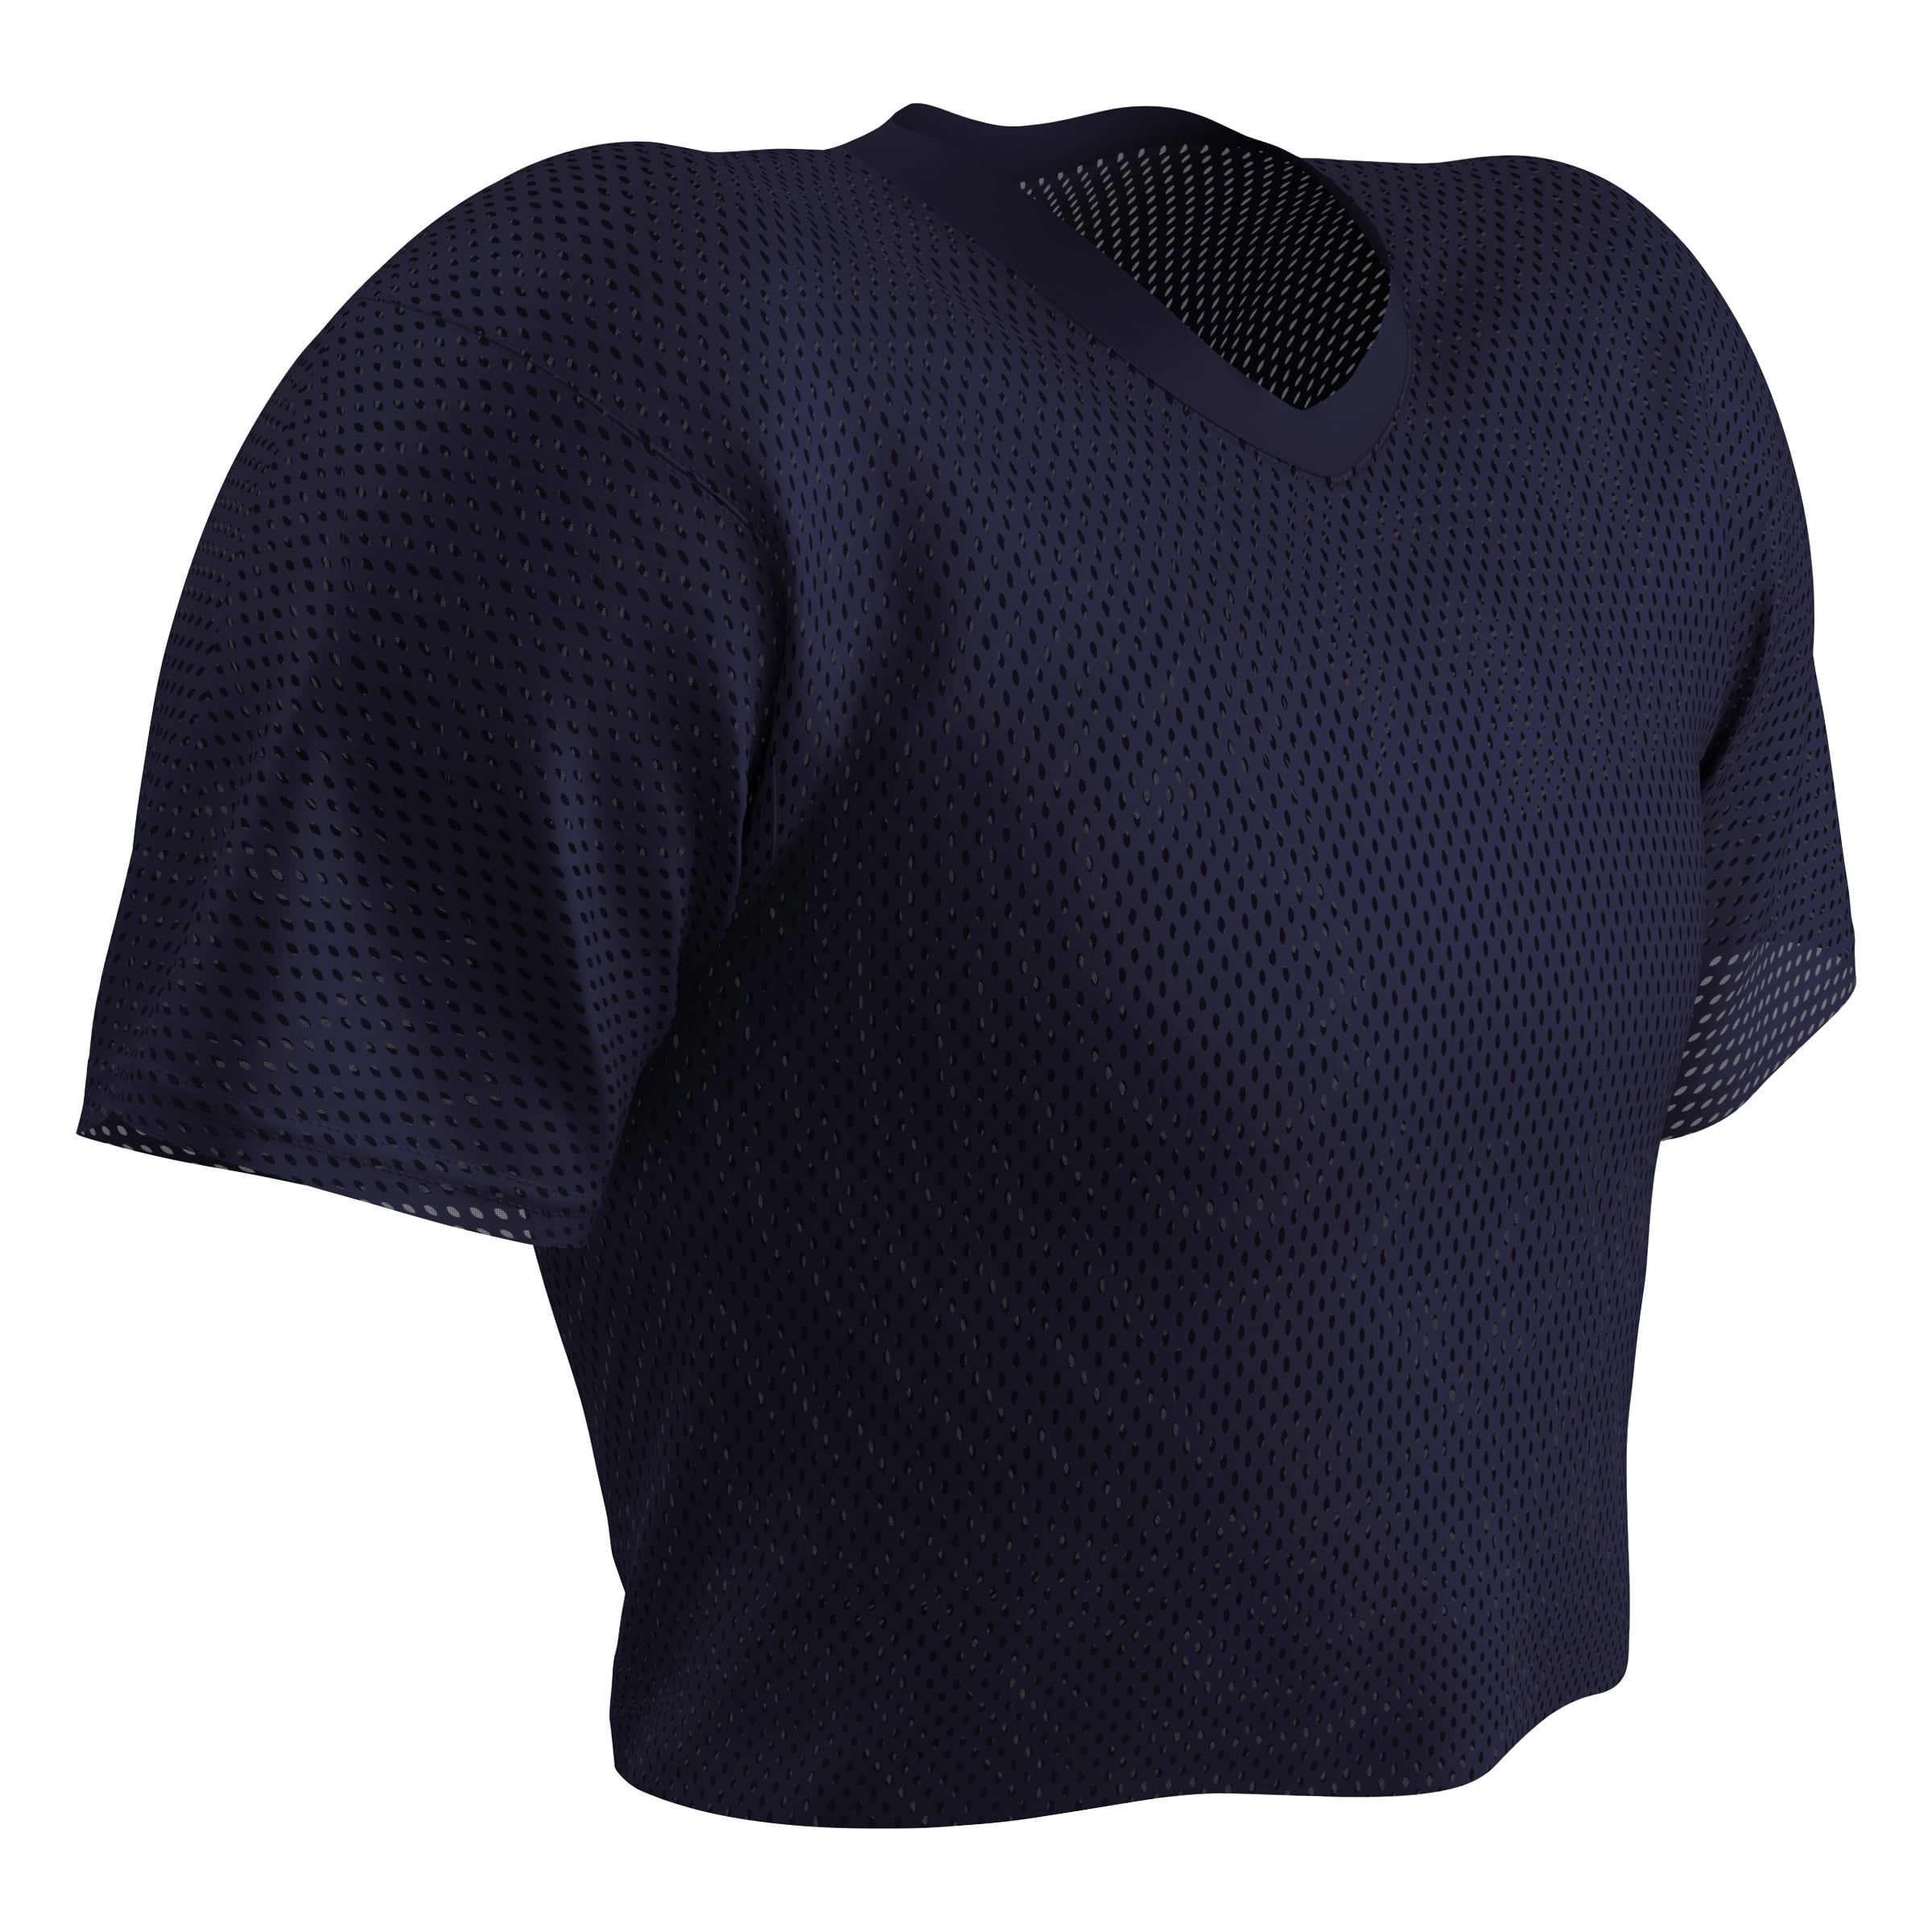 Champro Polyester Porthole Mesh Practice Football Jersey Adult Sizes Available 